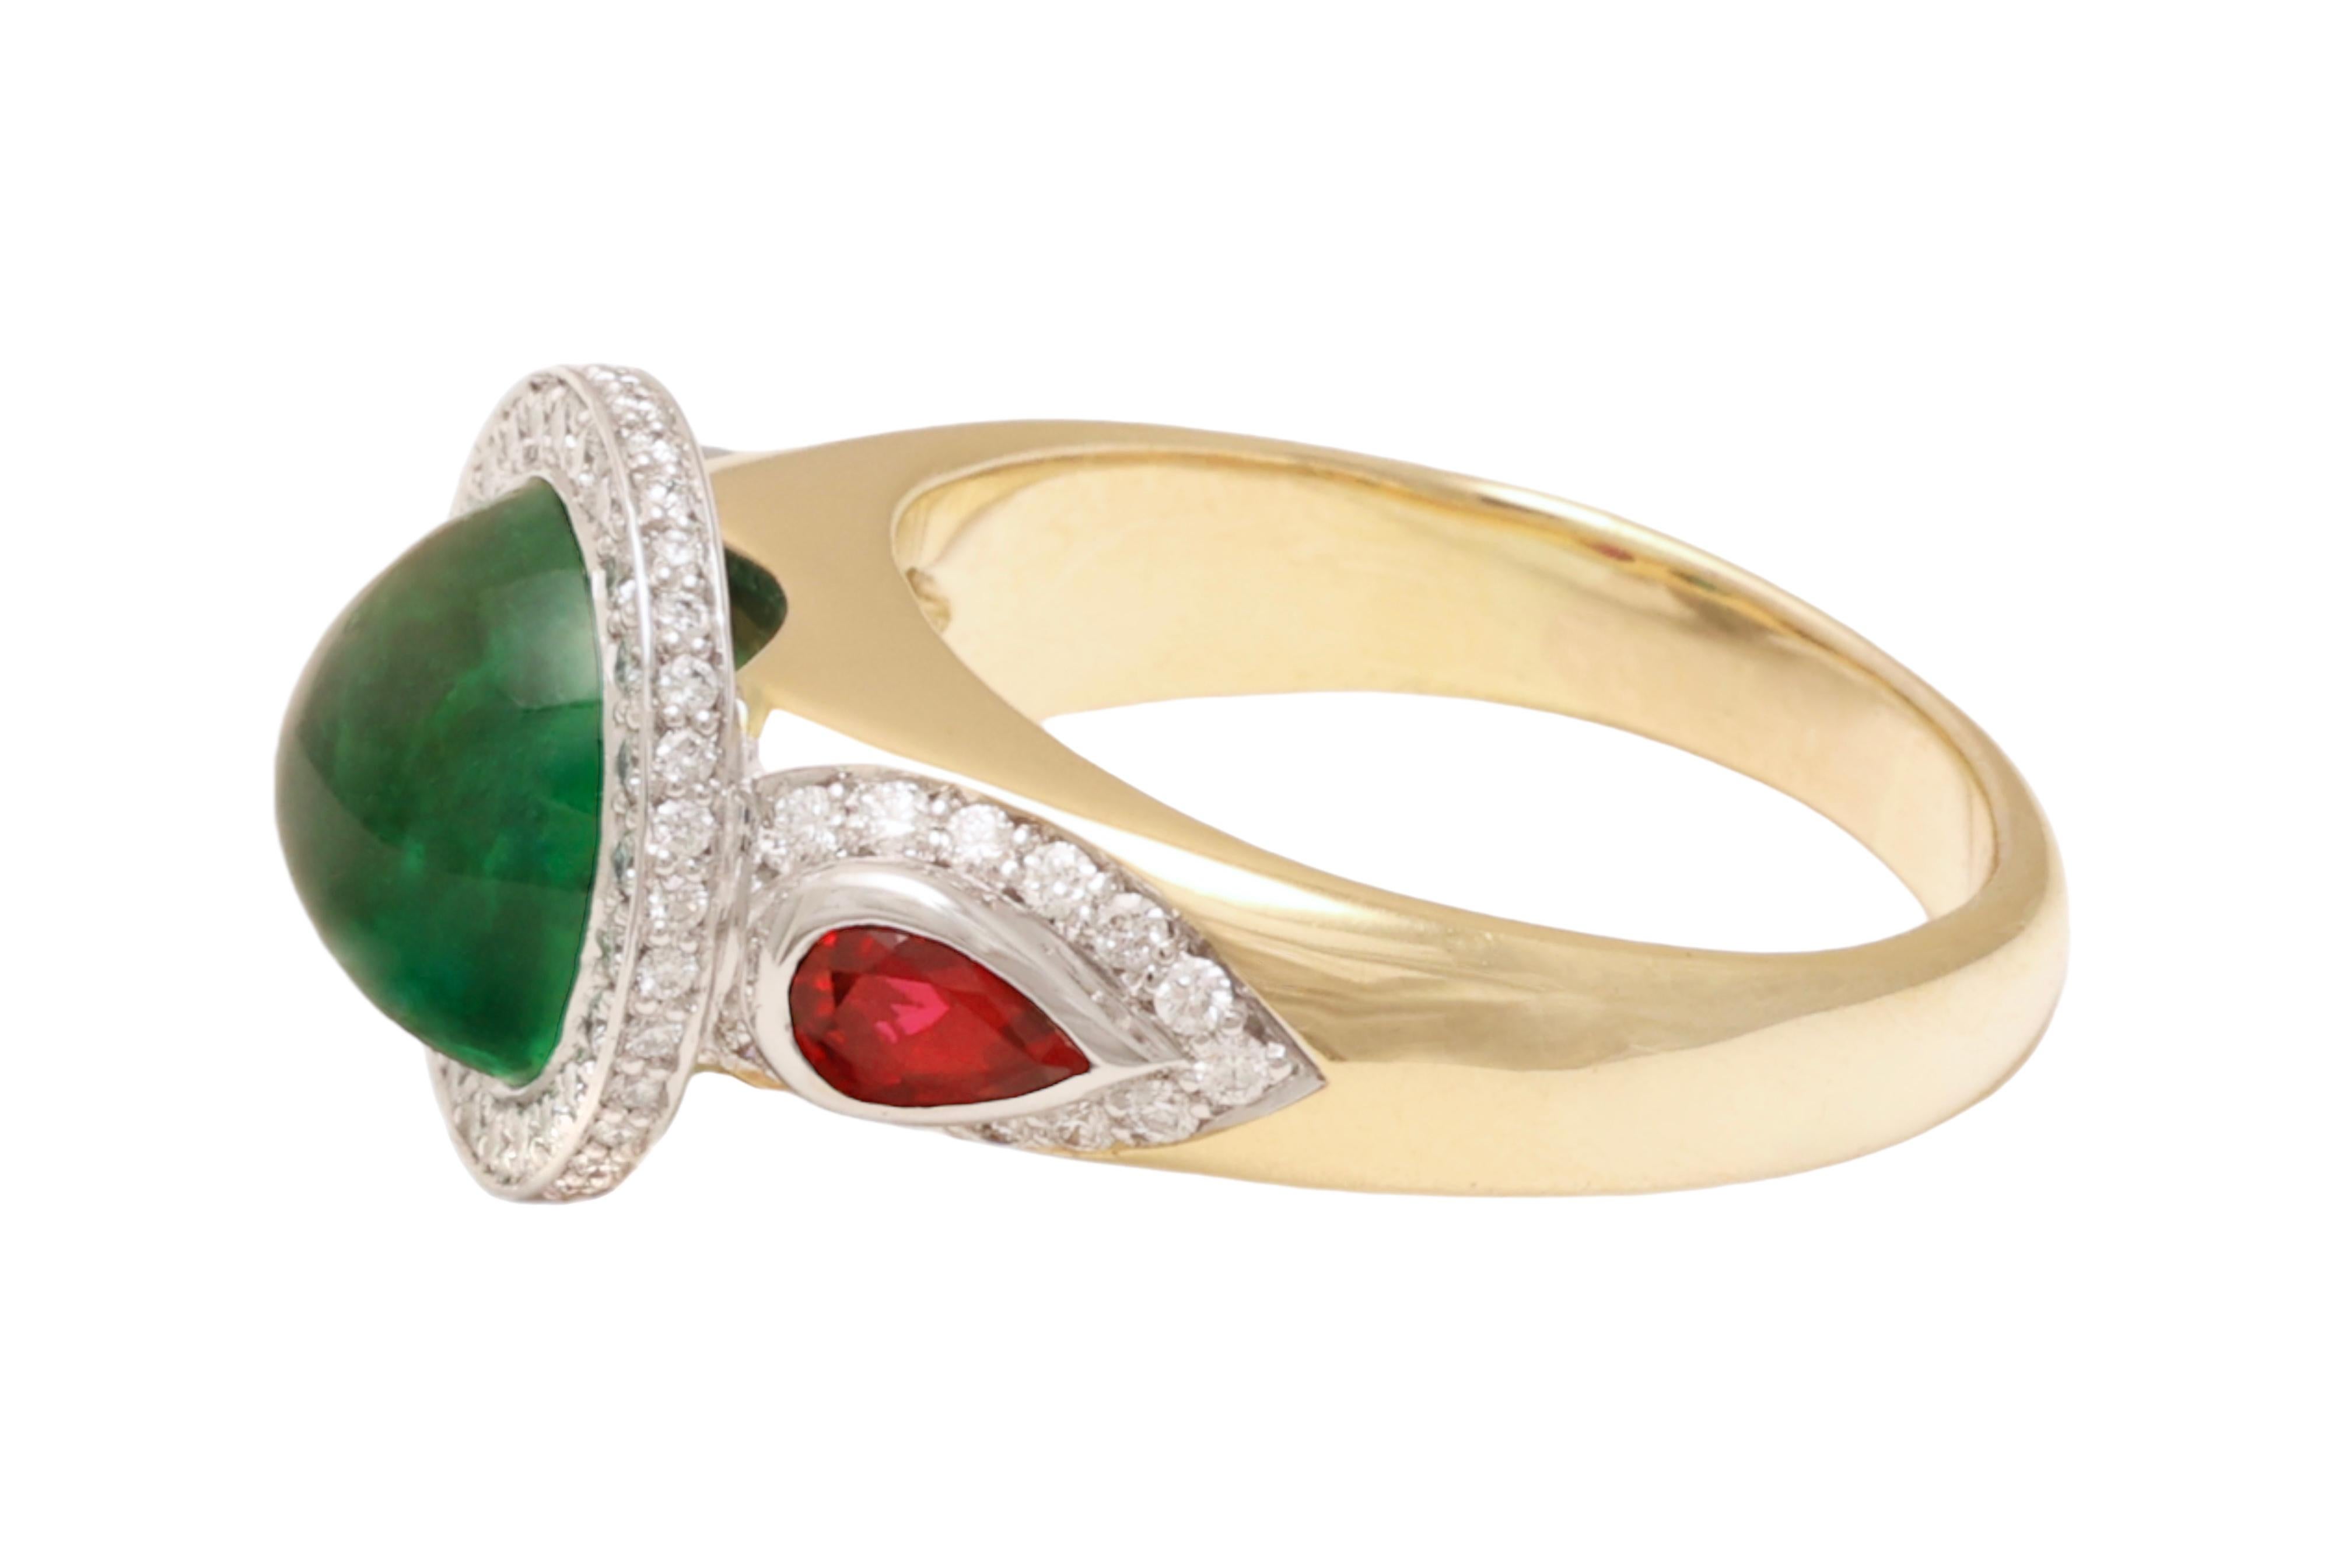 Artisan 18 kt. Gold Ring With 3.78 ct. Minor Emerald Cabochon, Diamonds, Sapphire, Ruby For Sale